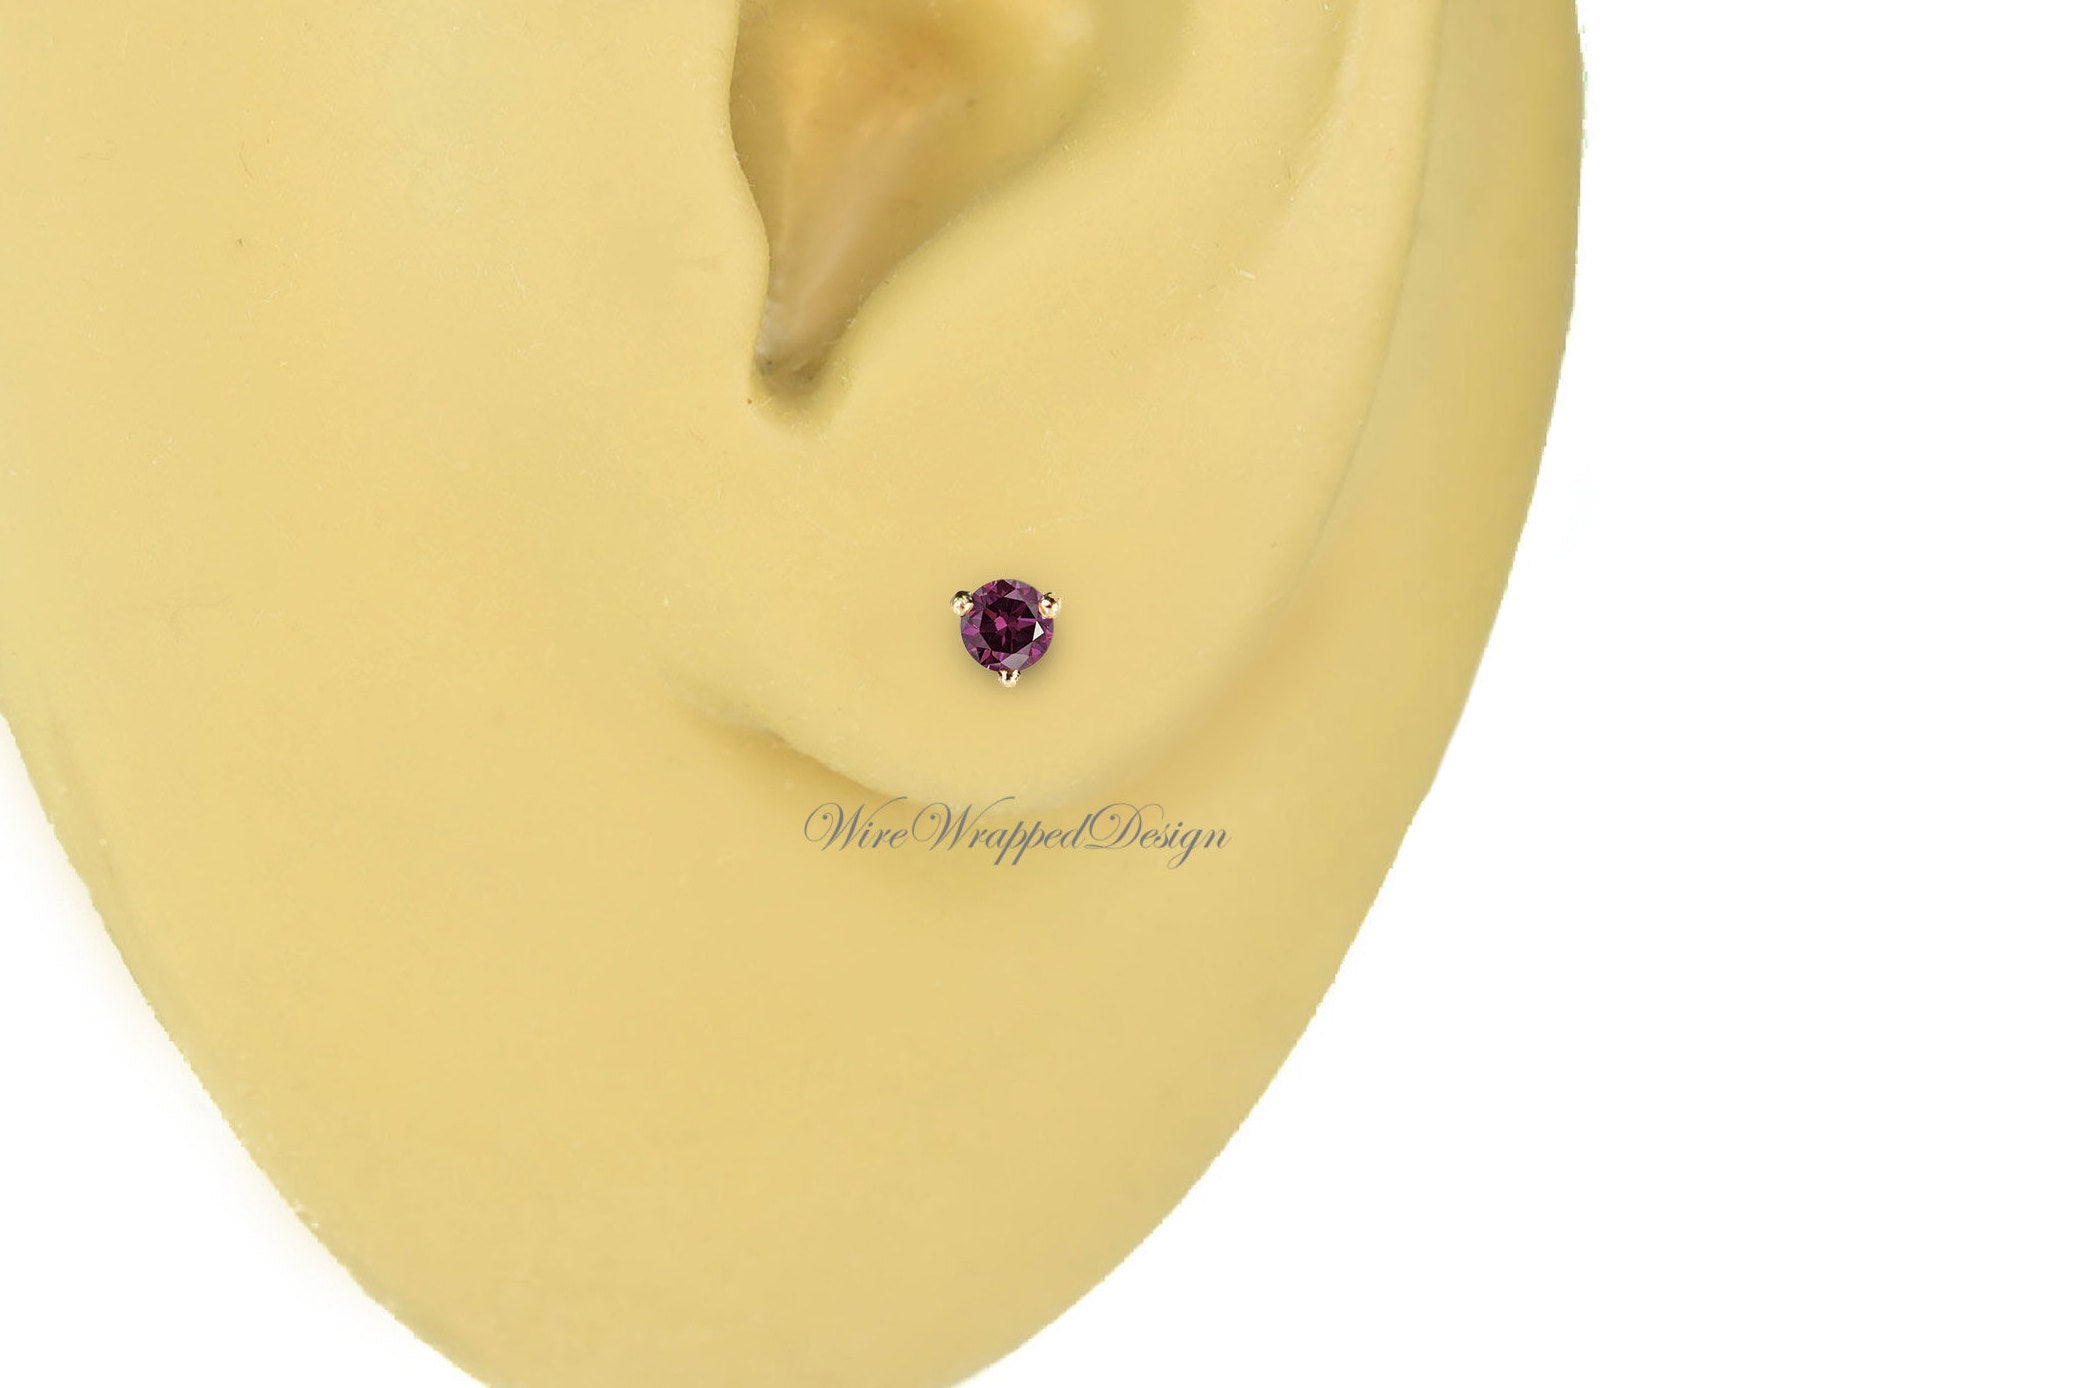 PAIR Genuine PURPLE DIAMOND Earrings Studs 2.5mm 0.12tcw Martini 14k Solid Gold (Yellow, Rose or White) Platinum, Silver Cartilage Helix